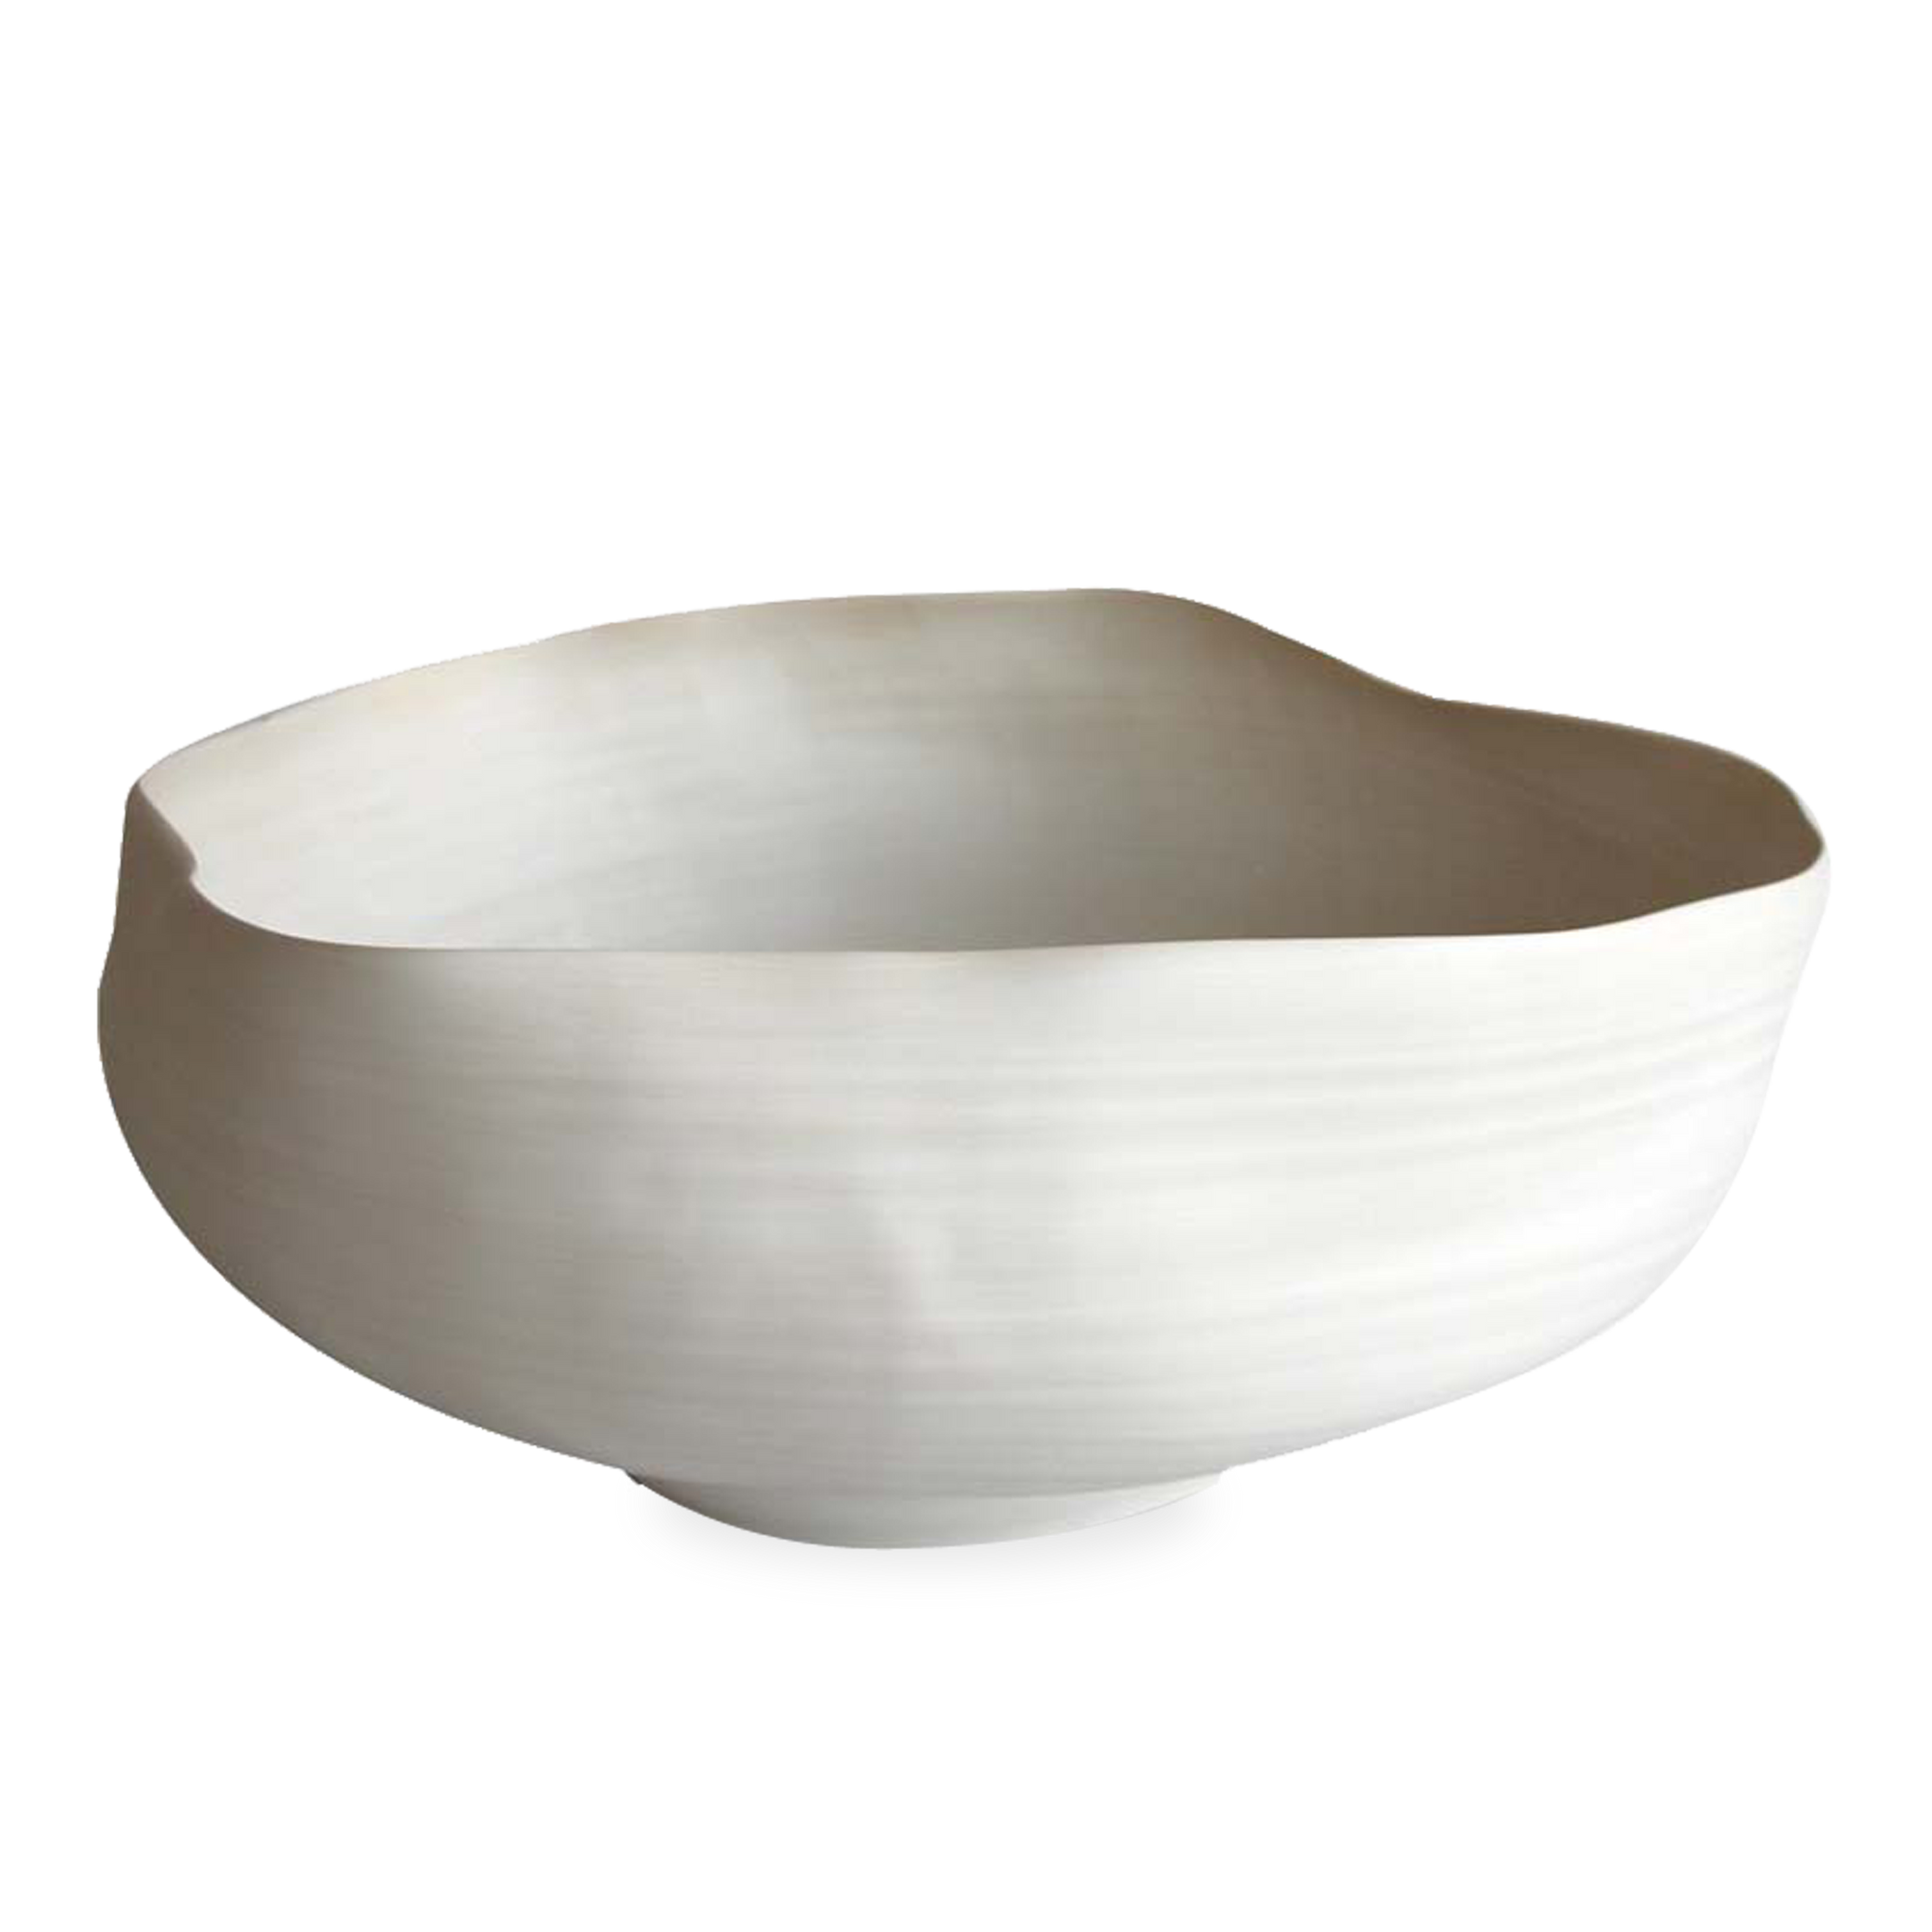 The Fonte Bowl is completely handmade in Italy and is characterized by simple lines, organic colours and shapes inspired by nature.